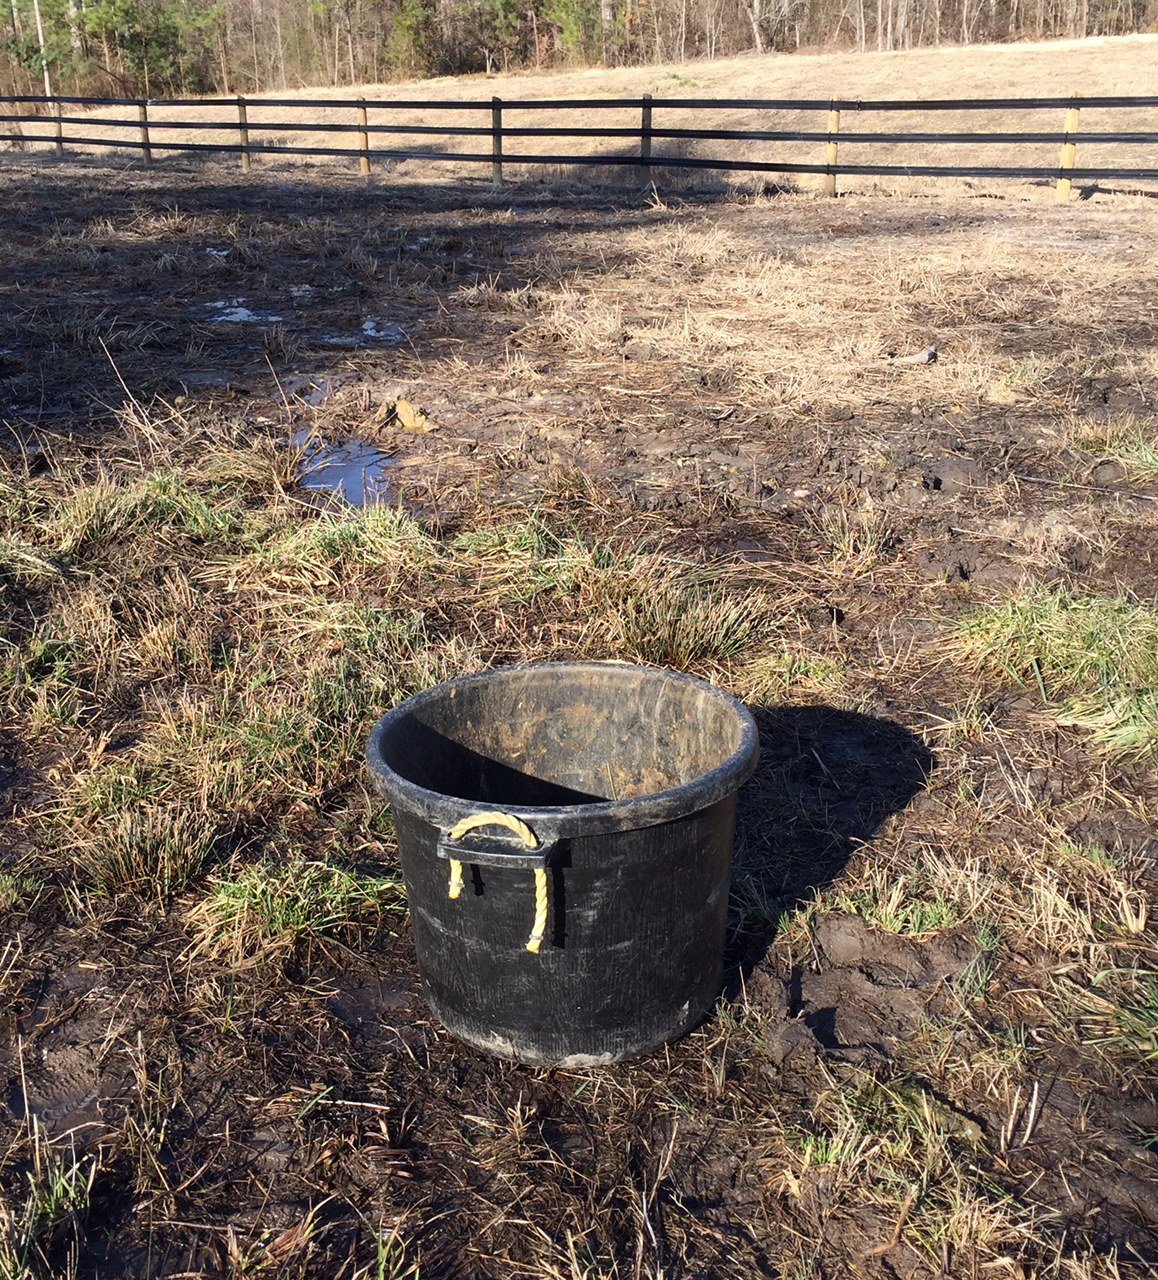 Bucket in a muddy horse pasture